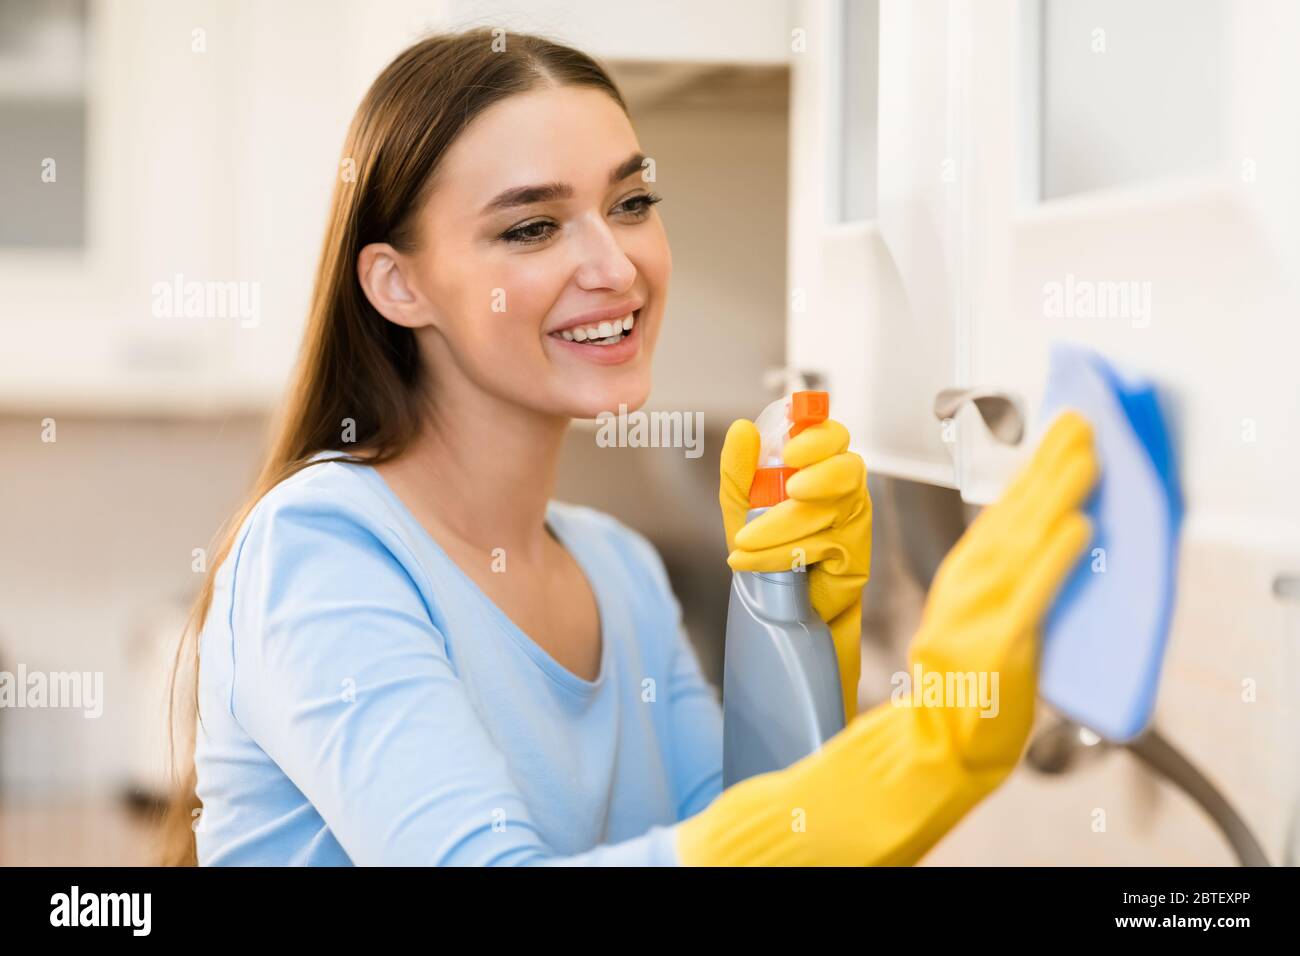 Young woman cleaning kitchen furniture using cloth and spray Stock Photo